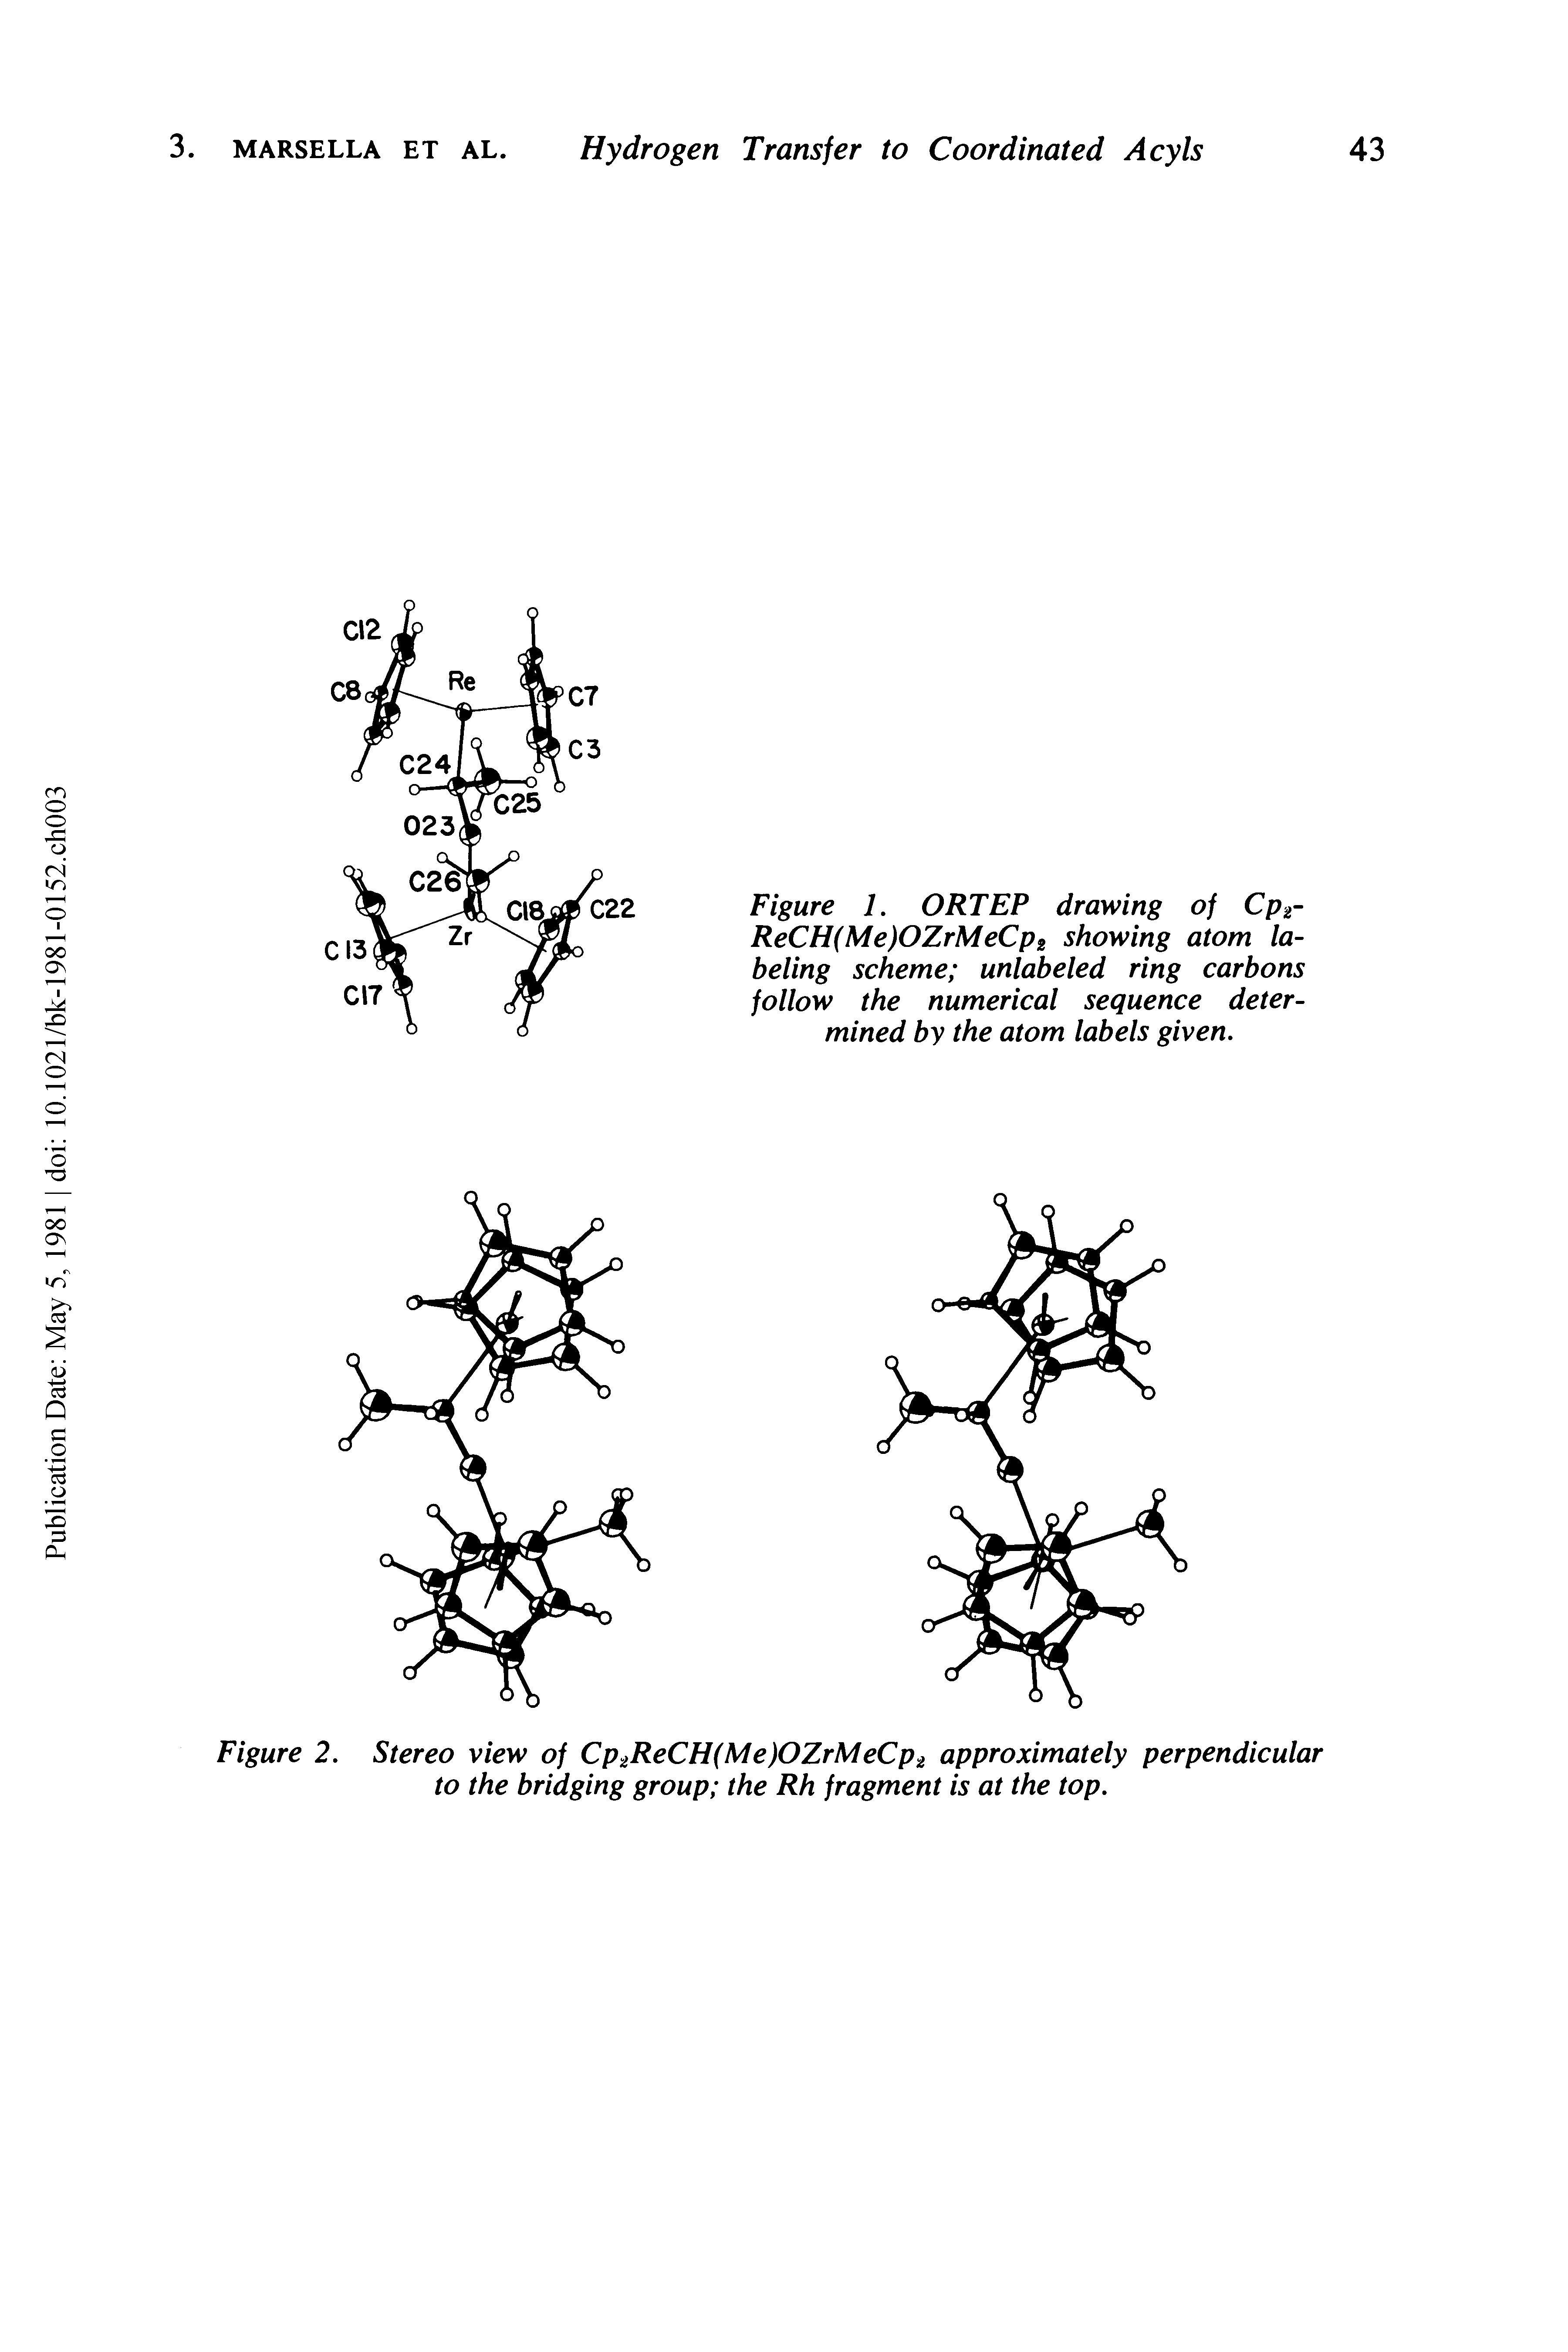 Figure 1. ORTEP drawing of Cp2-ReCH(Me)OZrMeCp2 showing atom labeling scheme unlabeled ring carbons follow the numerical sequence determined by the atom labels given.